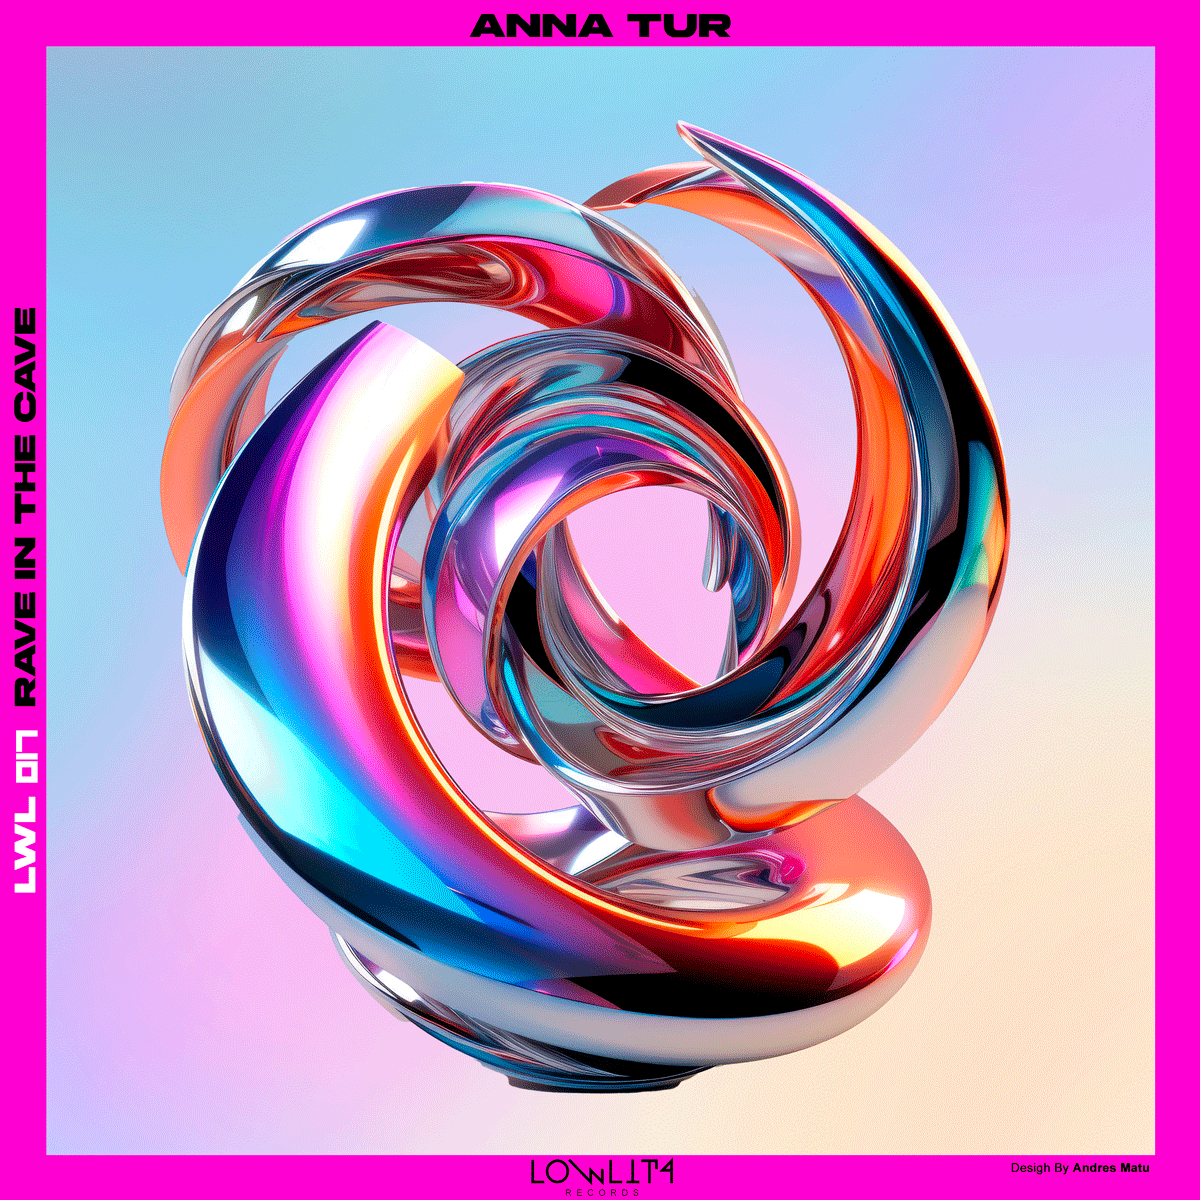 Anna Tur delivers a new single titled “Rave In The Cave”